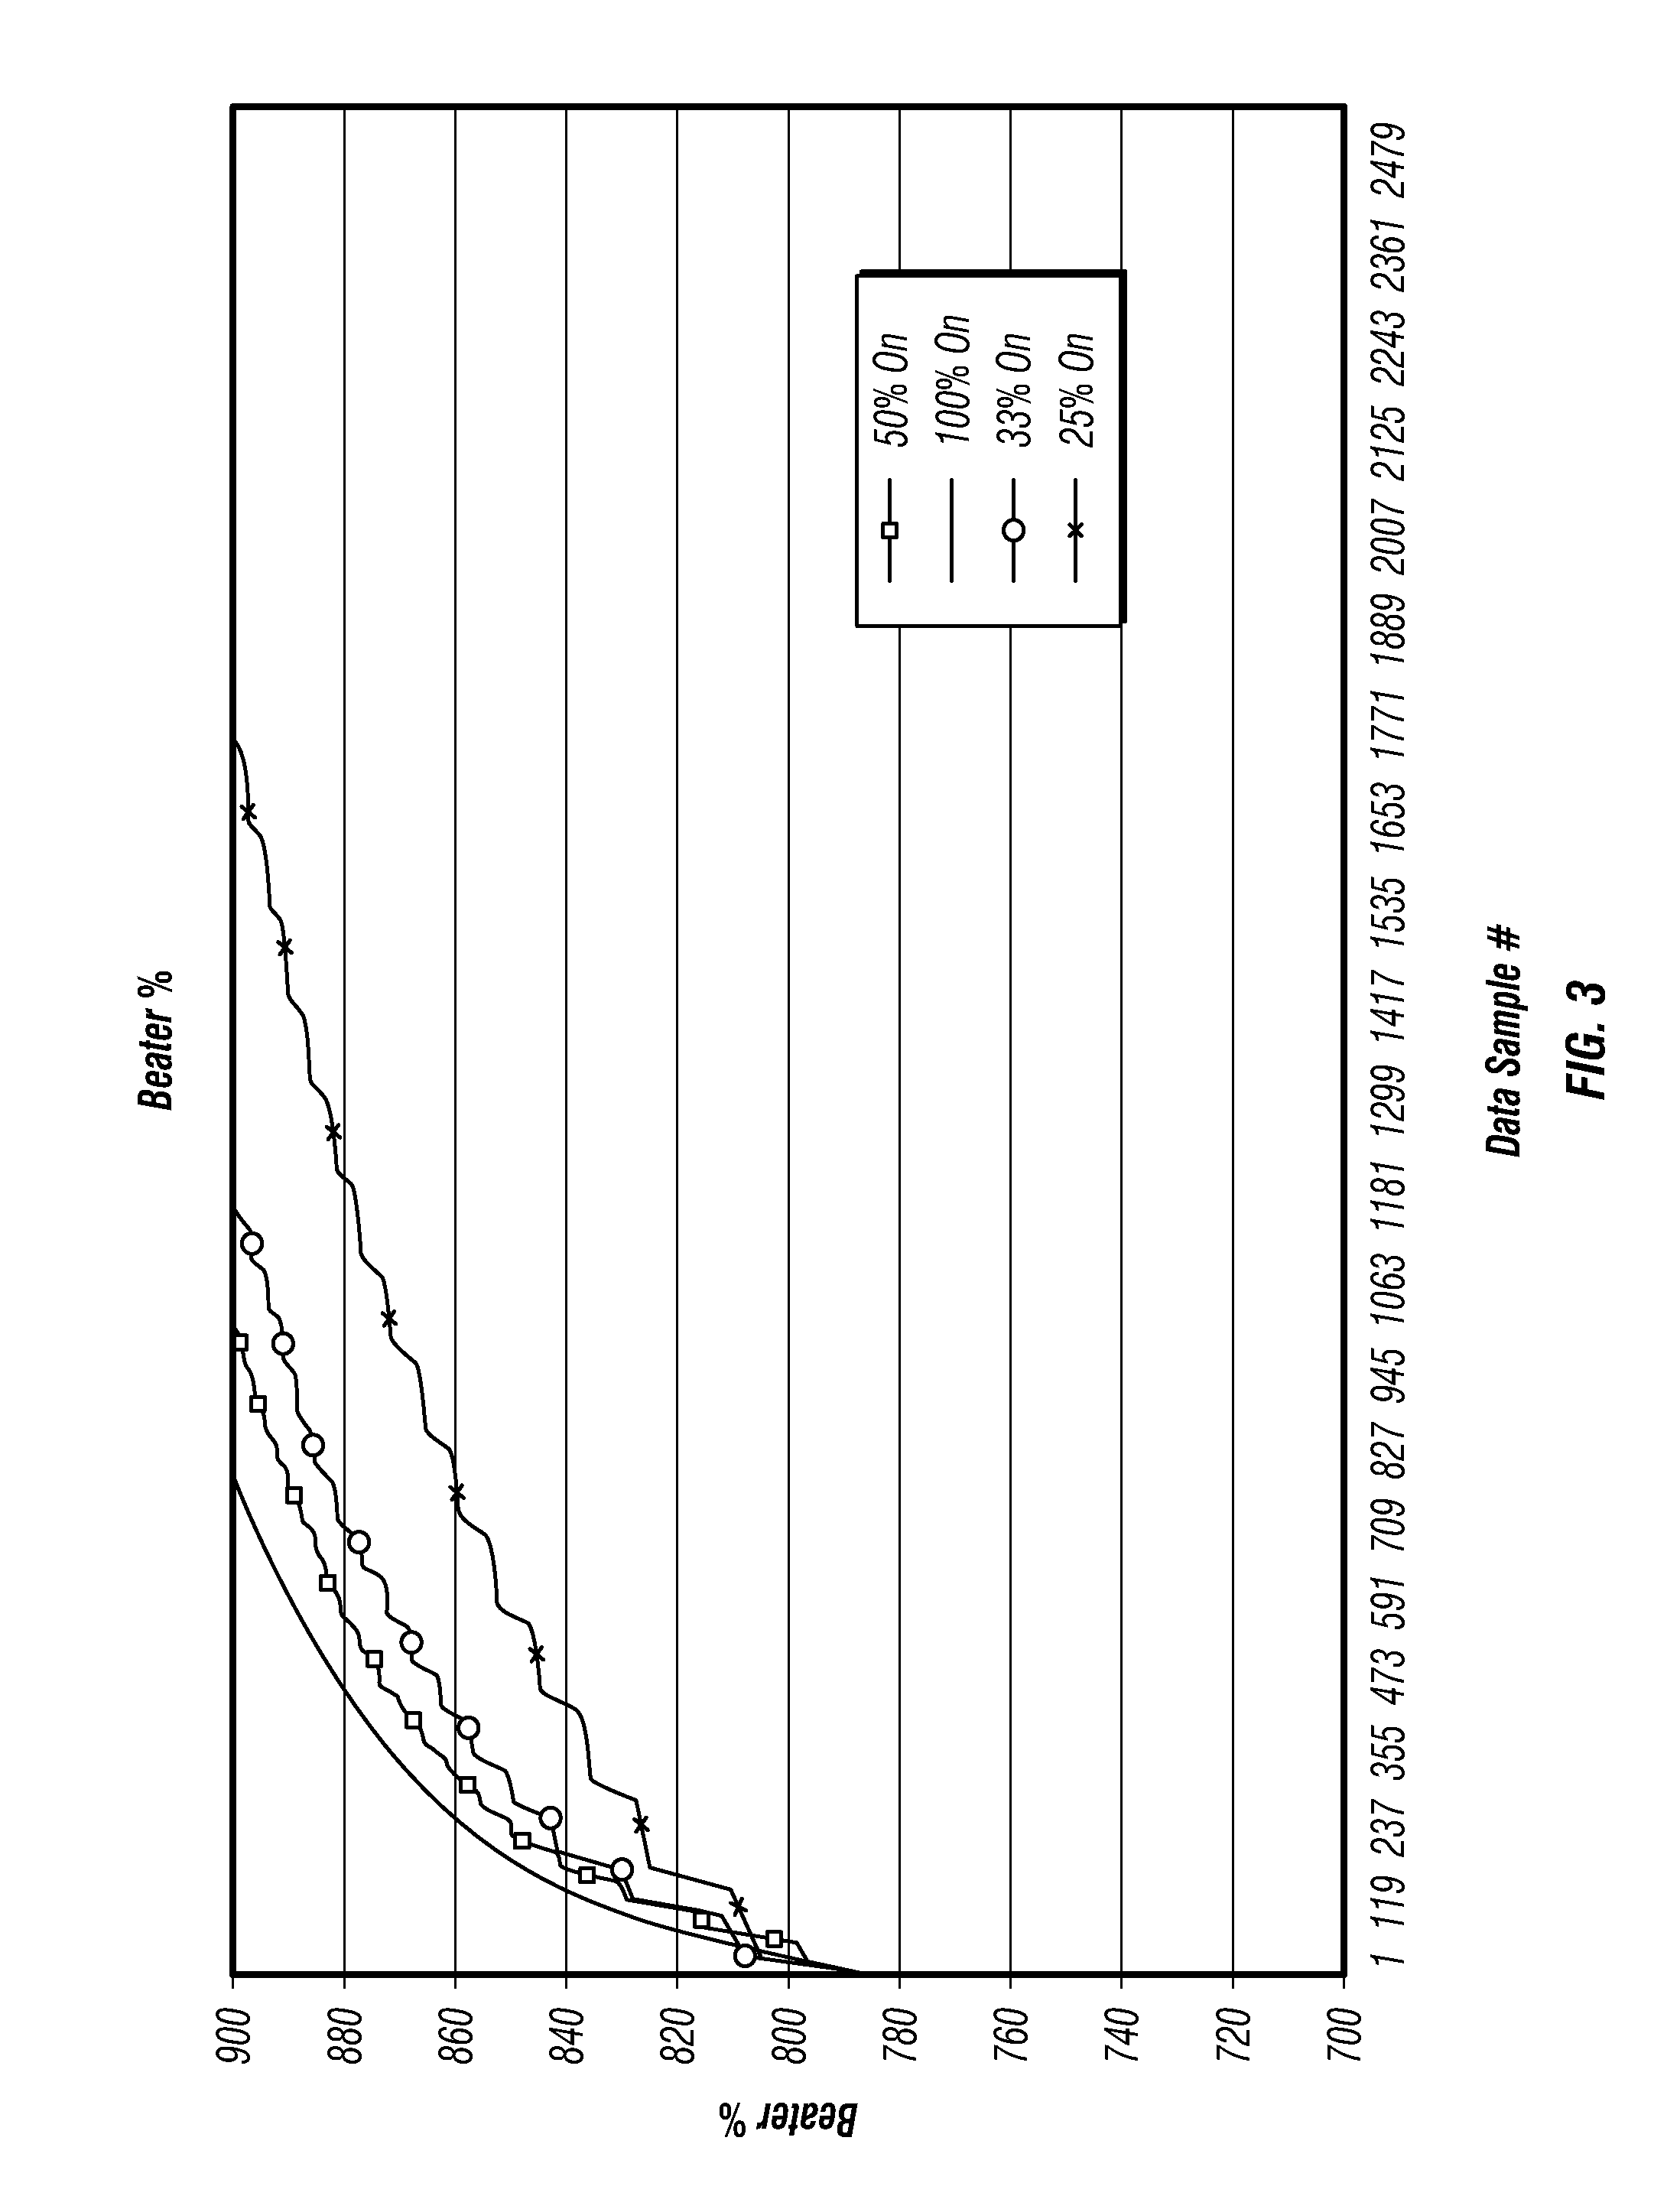 Method and system for reduced energy in a beverage machine